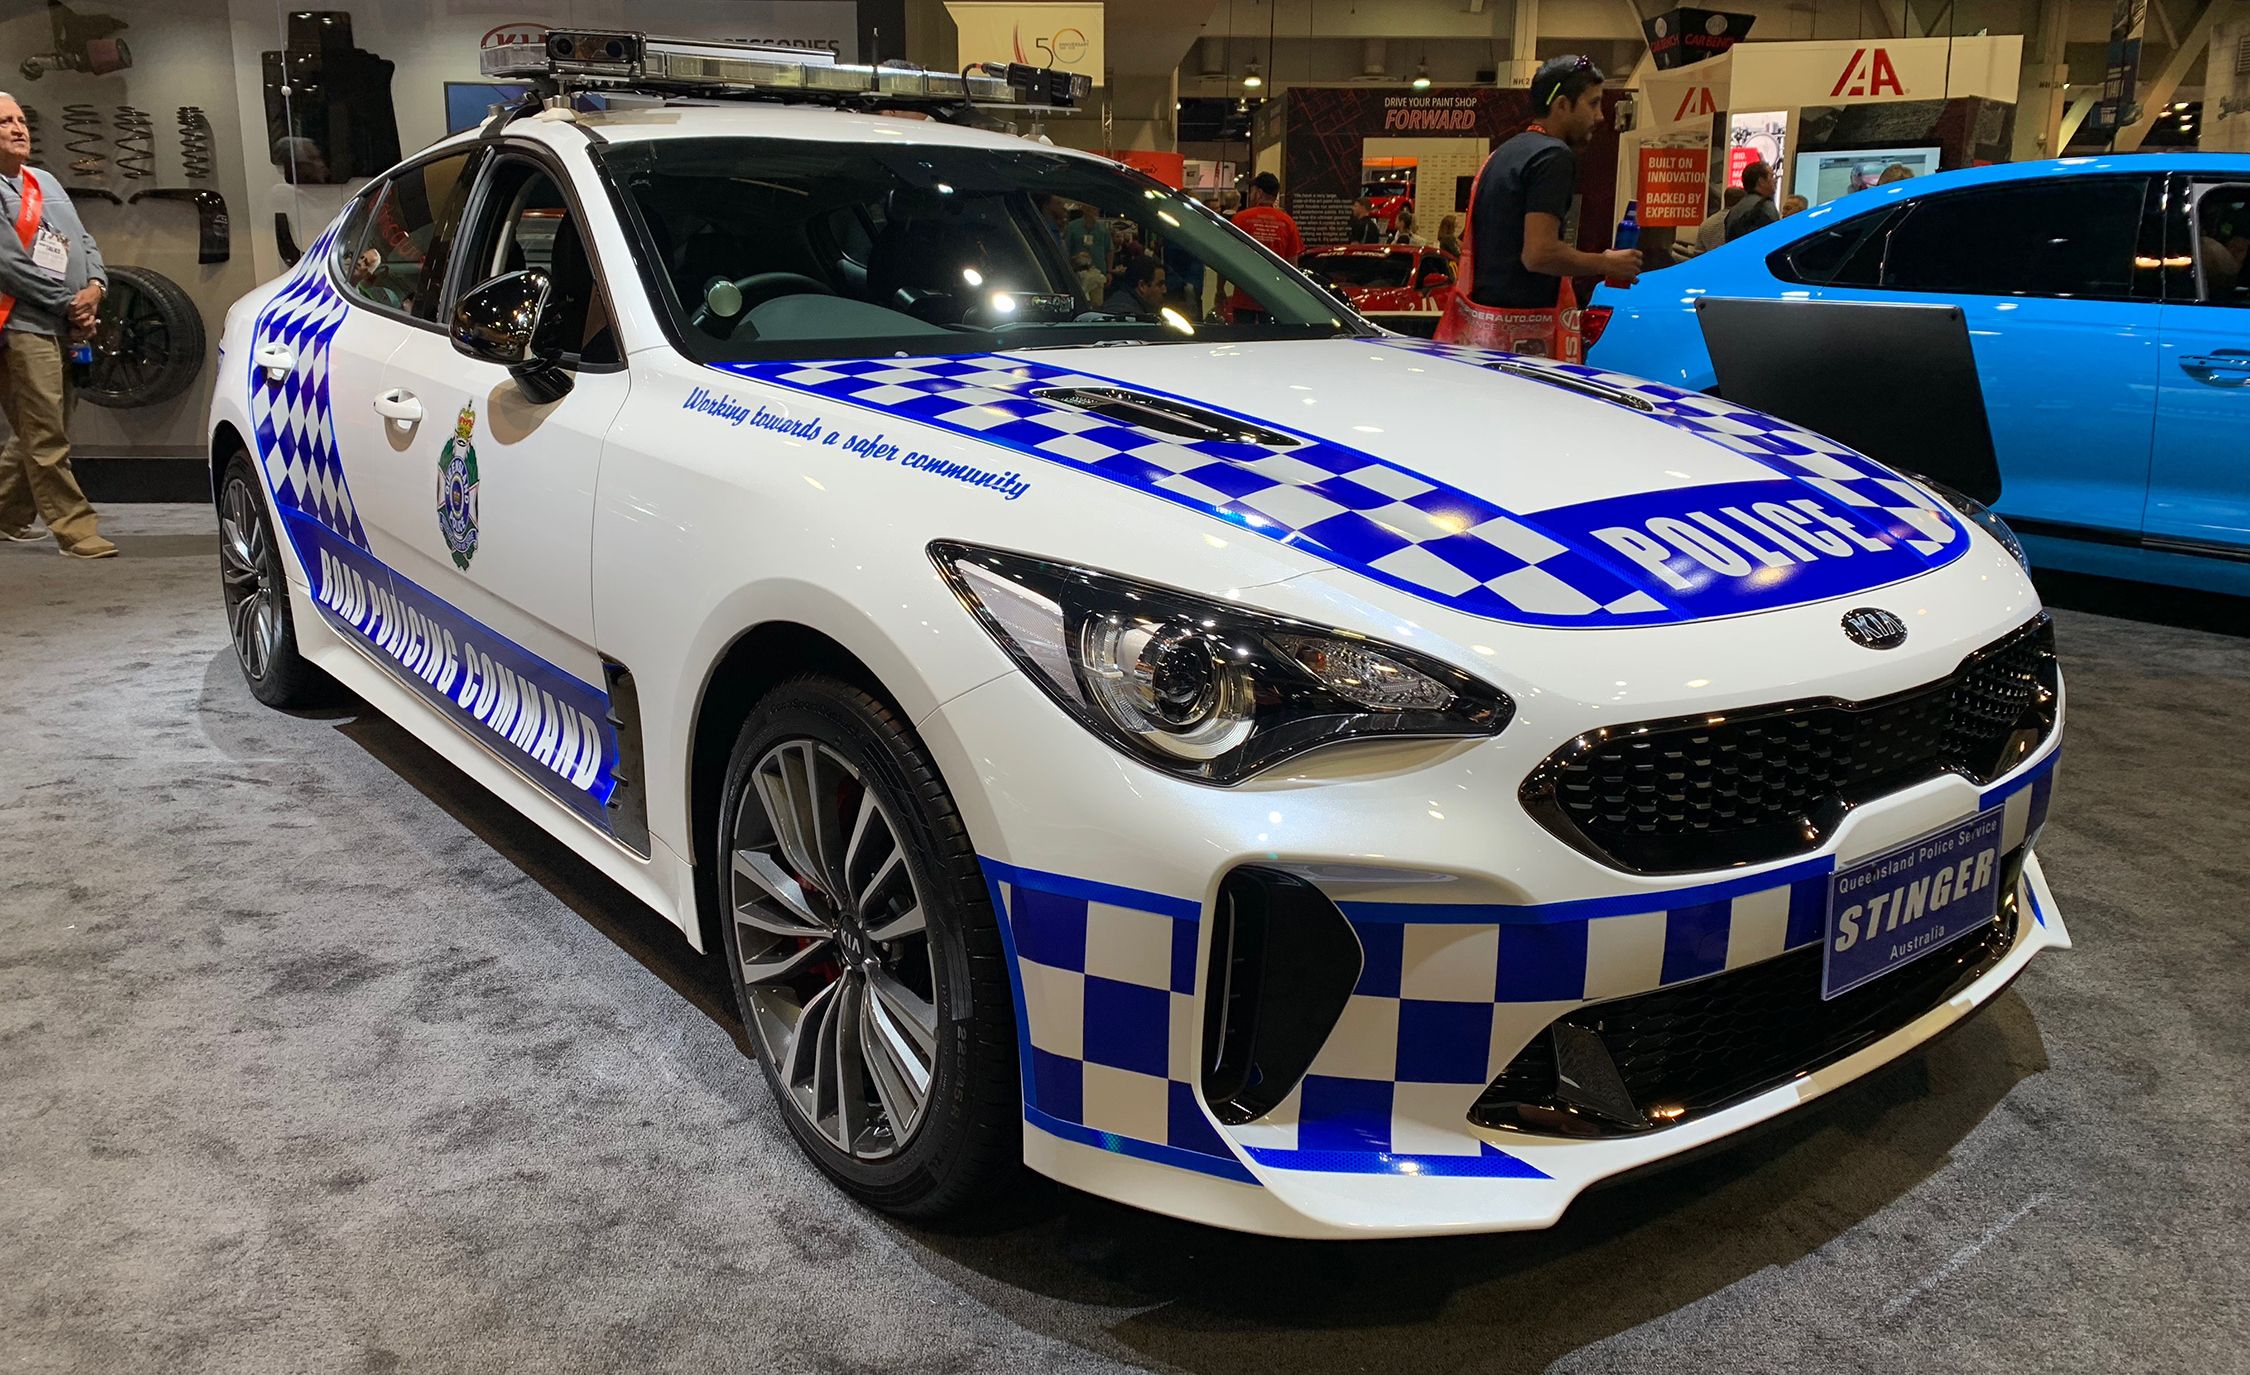 Kia Stinger Pulled Up for Duty in an Australian Department